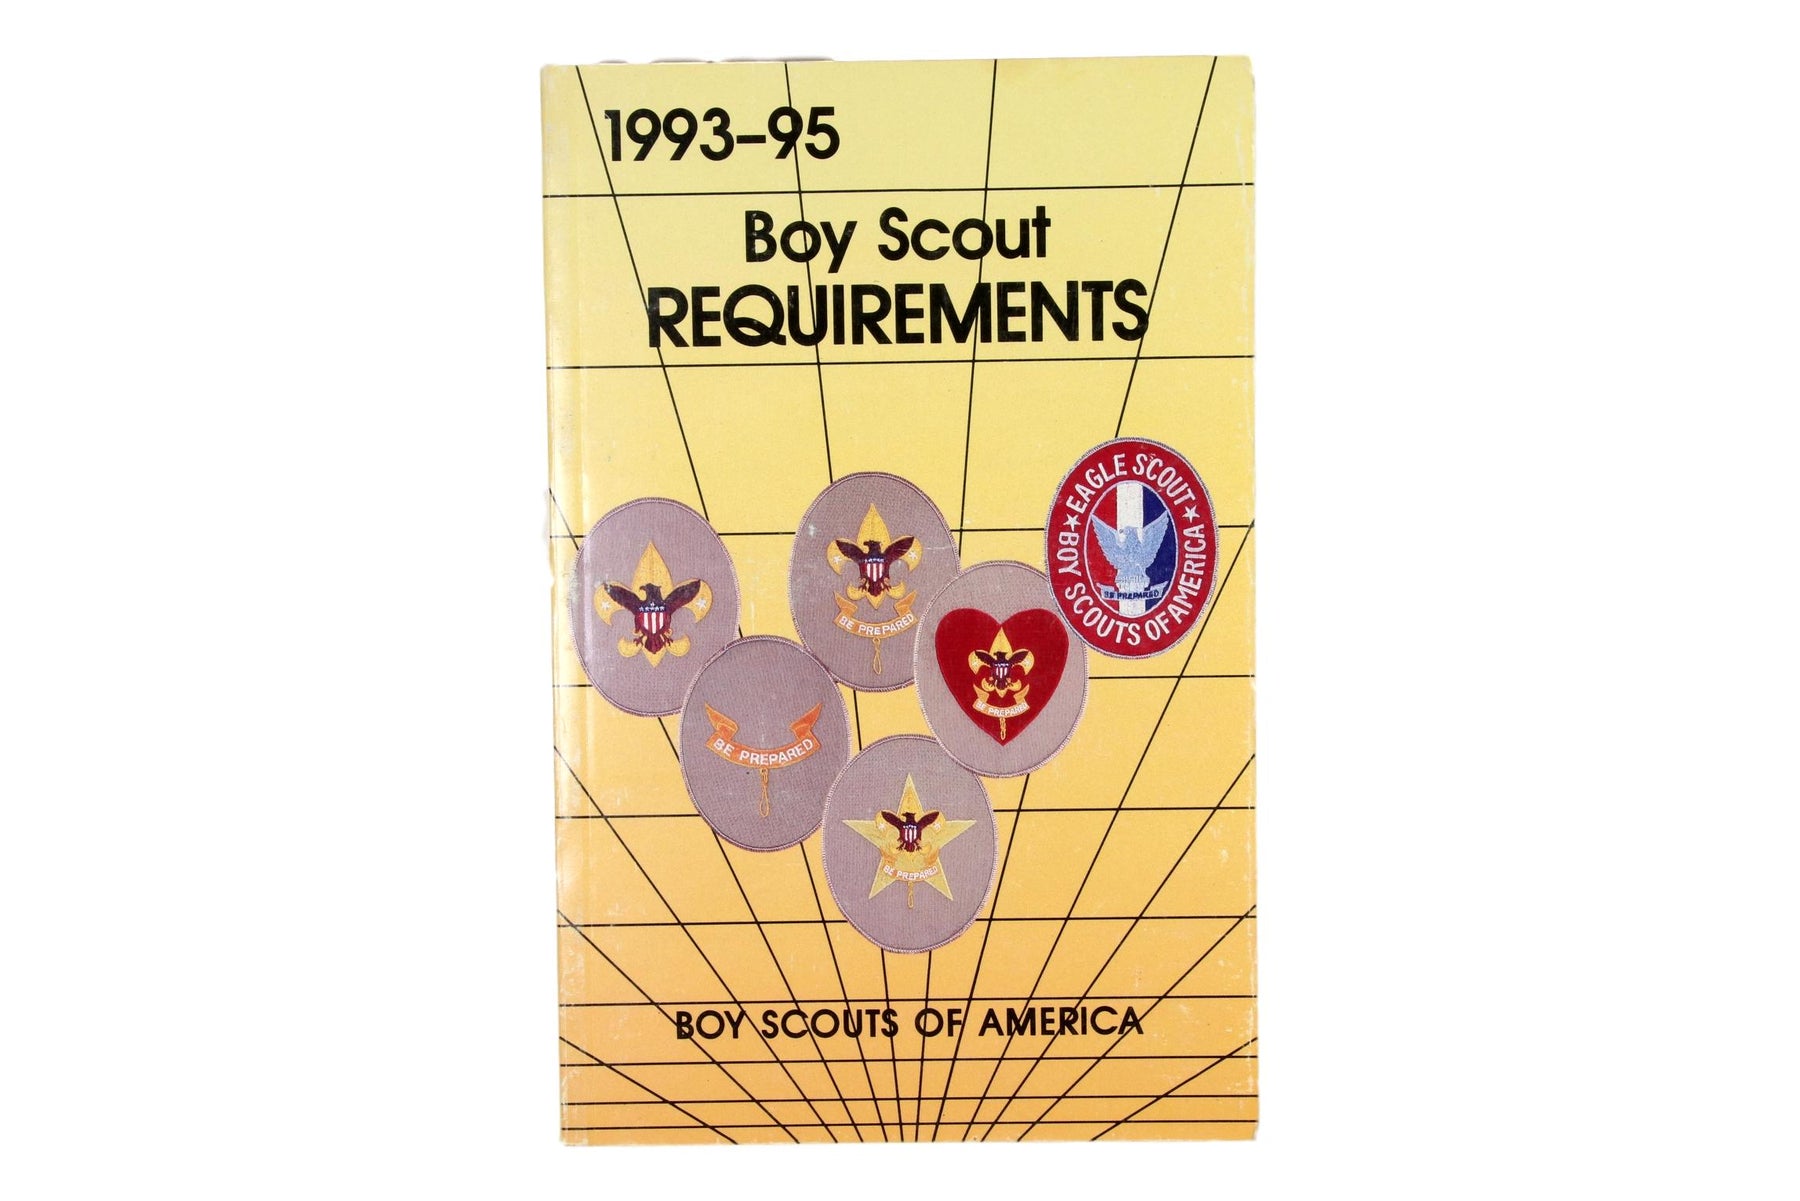 Boy Scout Requirements Book 1993-95